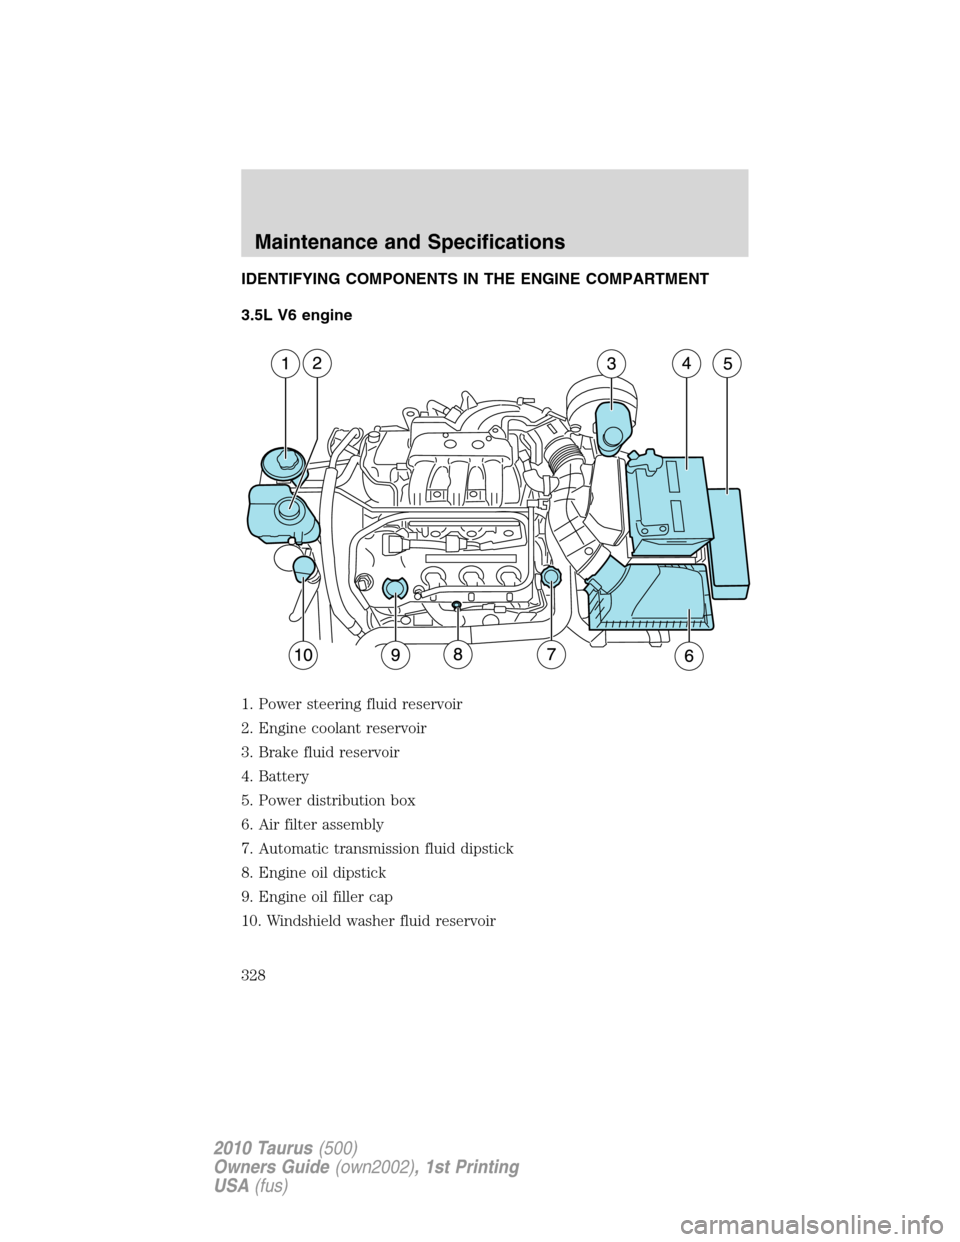 FORD TAURUS 2010 6.G Owners Guide IDENTIFYING COMPONENTS IN THE ENGINE COMPARTMENT
3.5L V6 engine
1. Power steering fluid reservoir
2. Engine coolant reservoir
3. Brake fluid reservoir
4. Battery
5. Power distribution box
6. Air filte